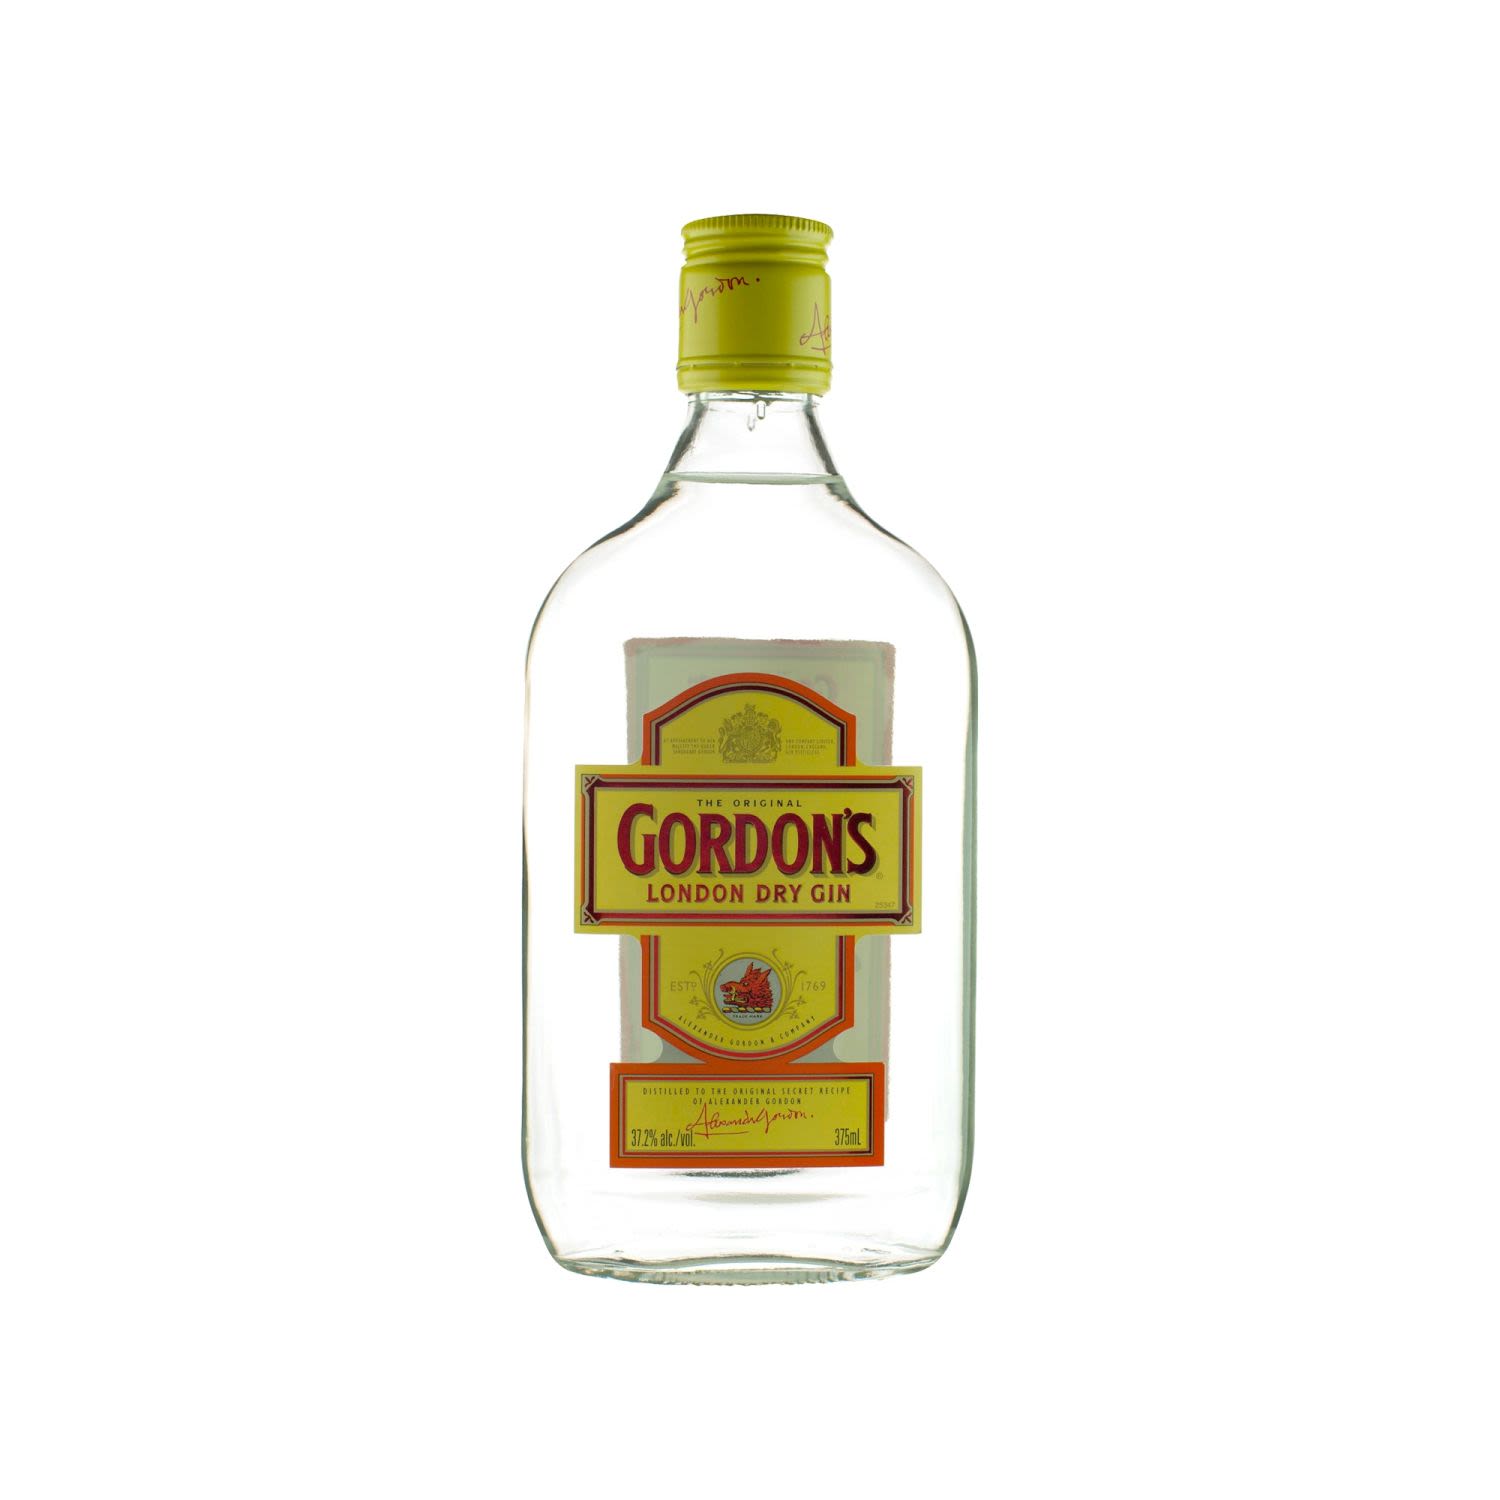 A unique blend of juniper berries, citrus and many rare herbs and spices combine to give Gordon's it's distinctive crisp taste and aromatic bouqet.<br /> <br />Alcohol Volume: 37.00%<br /><br />Pack Format: Bottle<br /><br />Standard Drinks: 11</br /><br />Pack Type: Bottle<br /><br />Country of Origin: England<br />